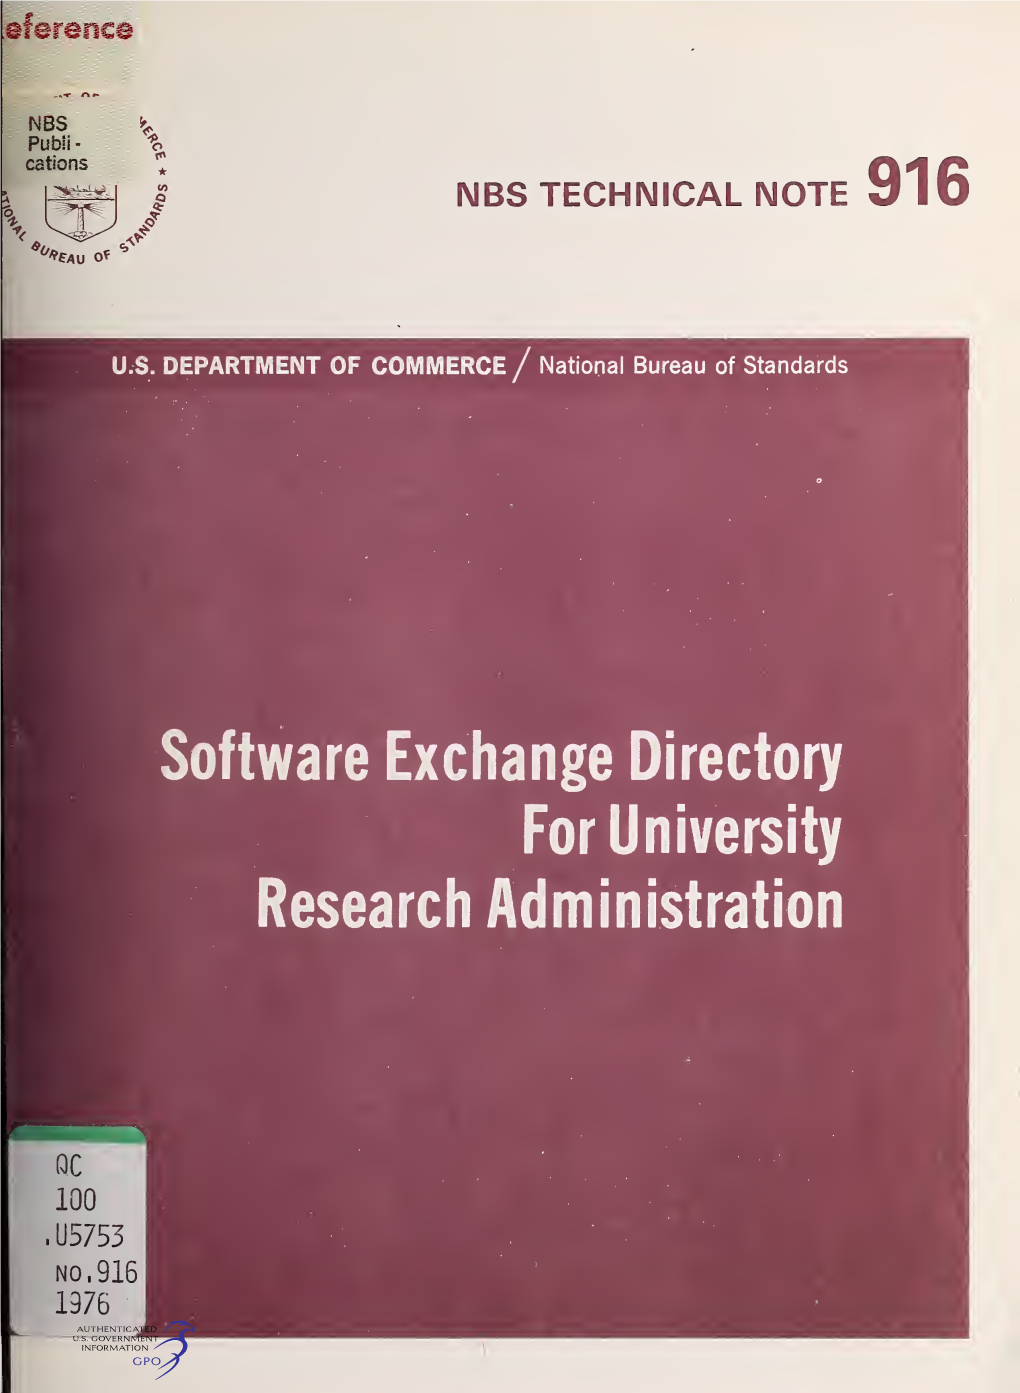 Software Exchange Directory for University Research Administration 05753